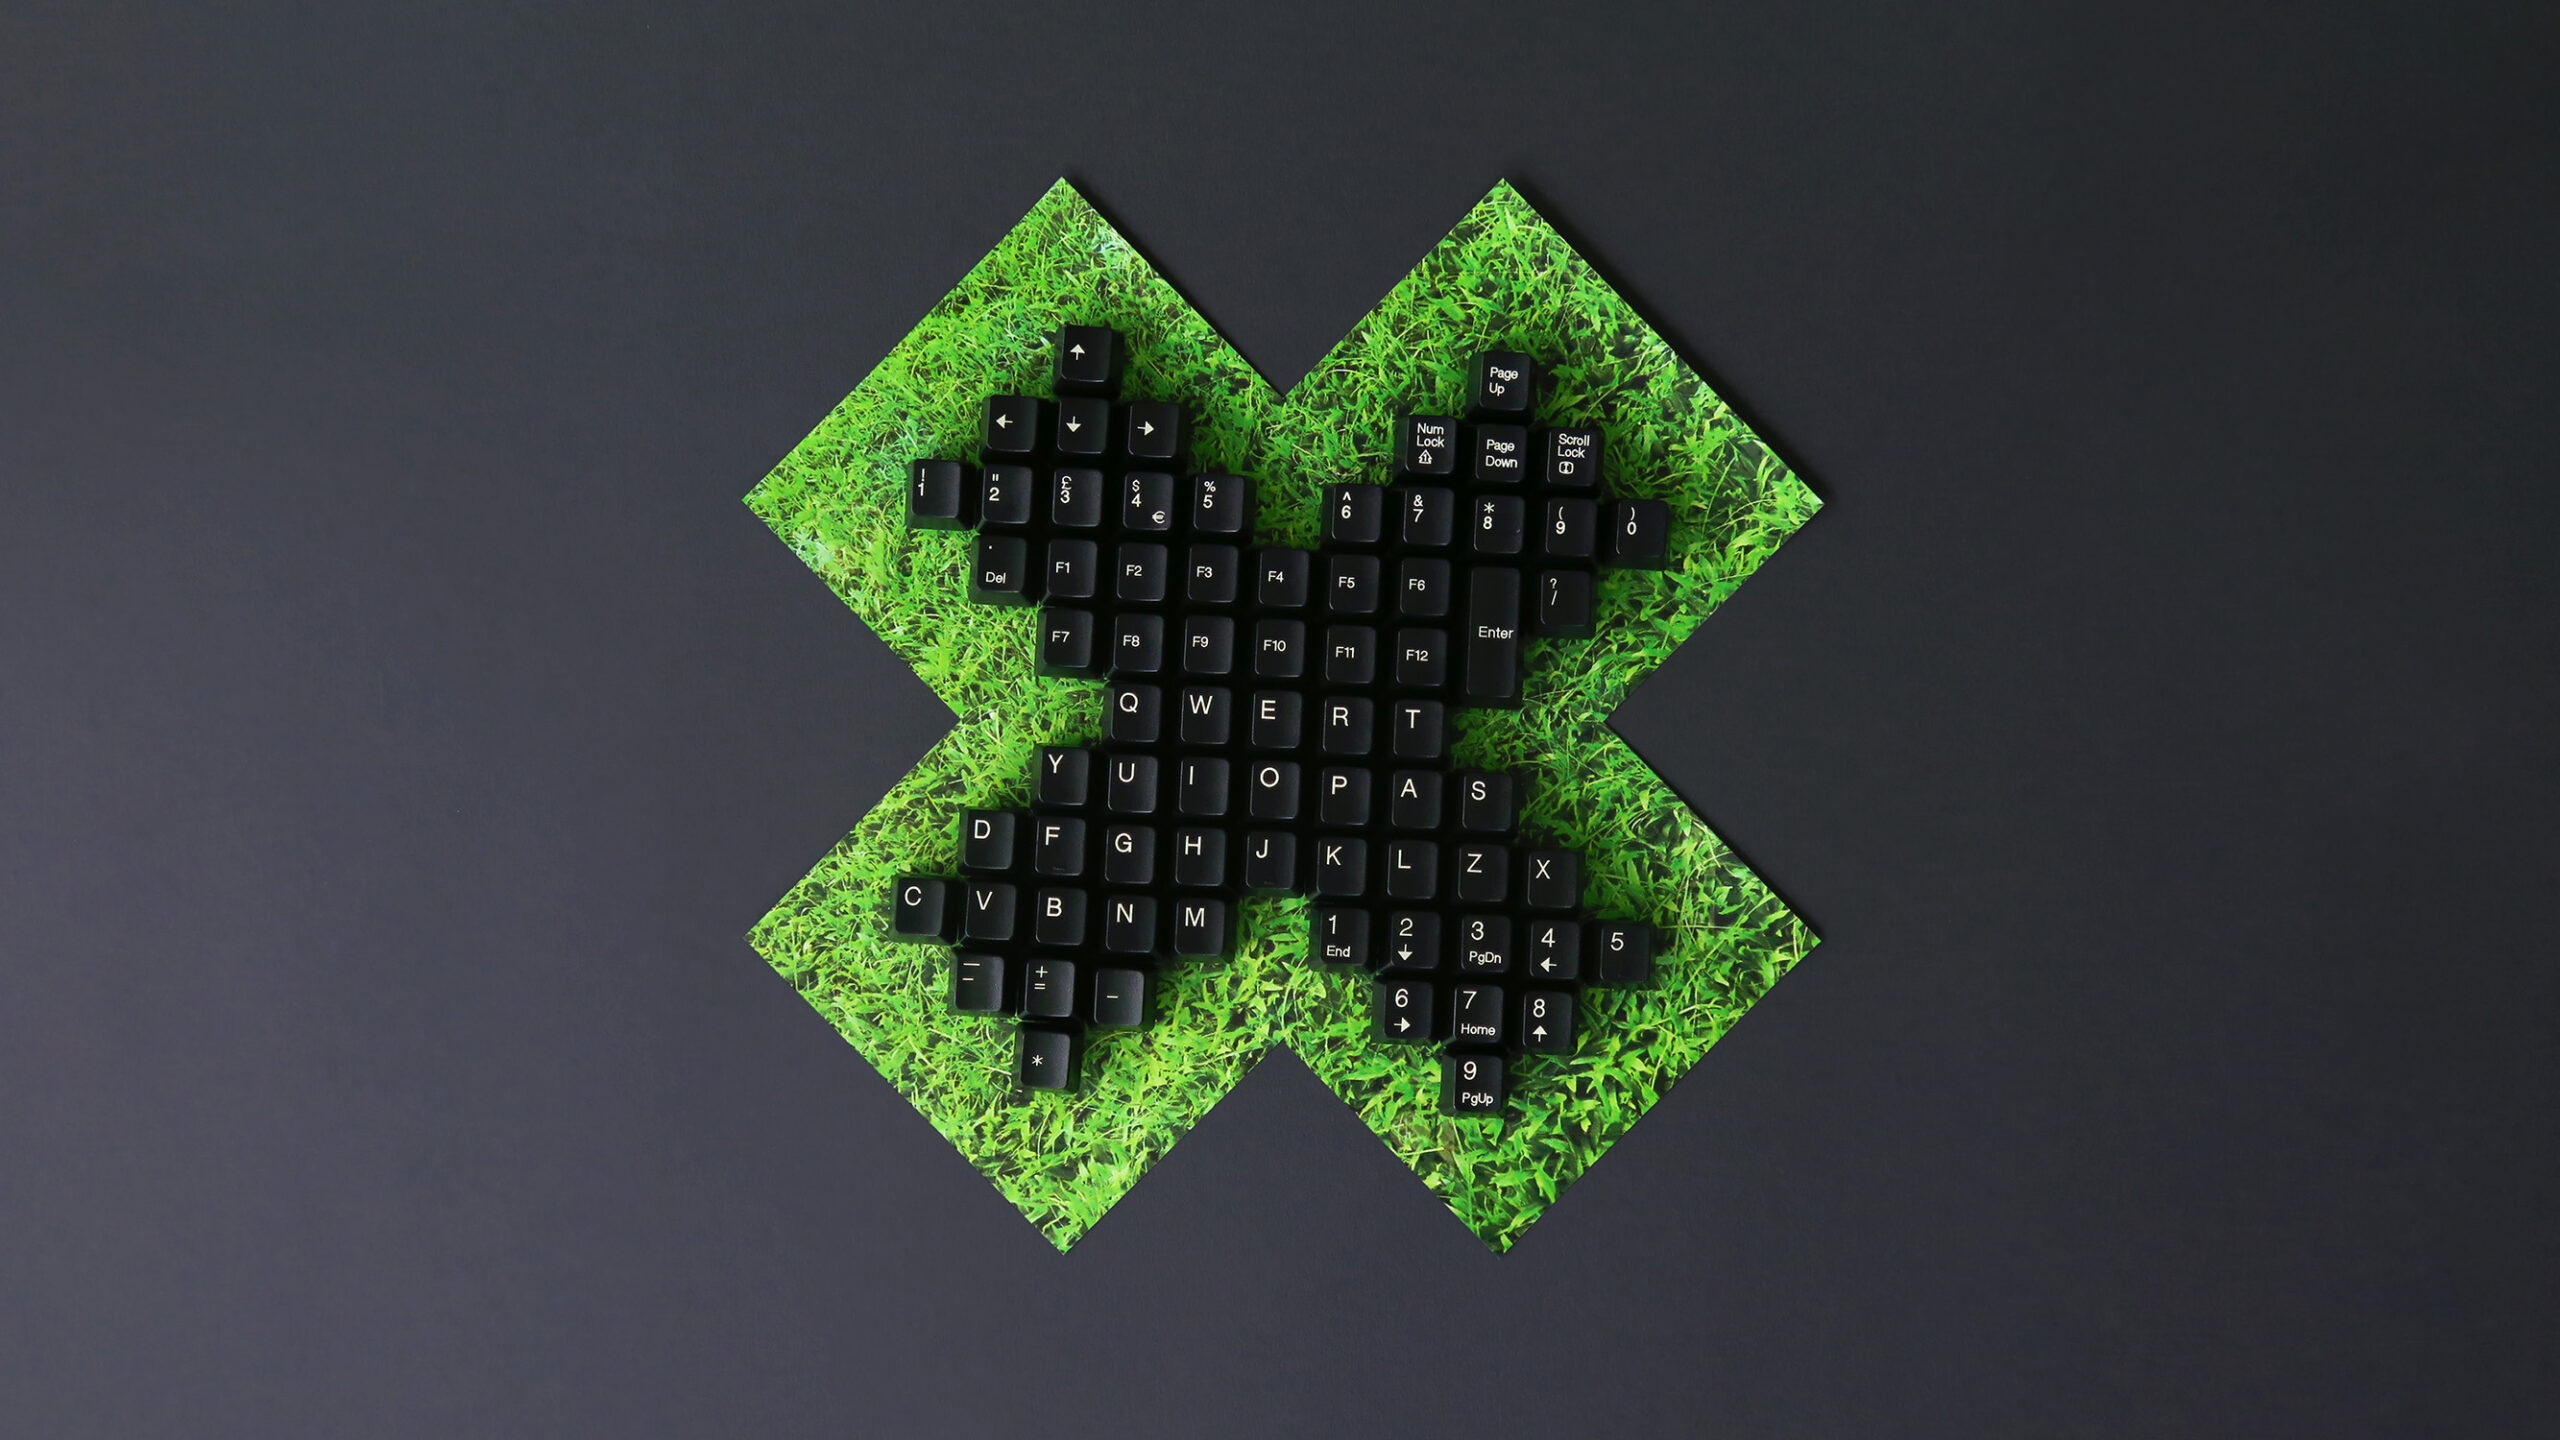 An image of a keyboard shaped in an X design juxtaposed against a slightly larger X shape of grass